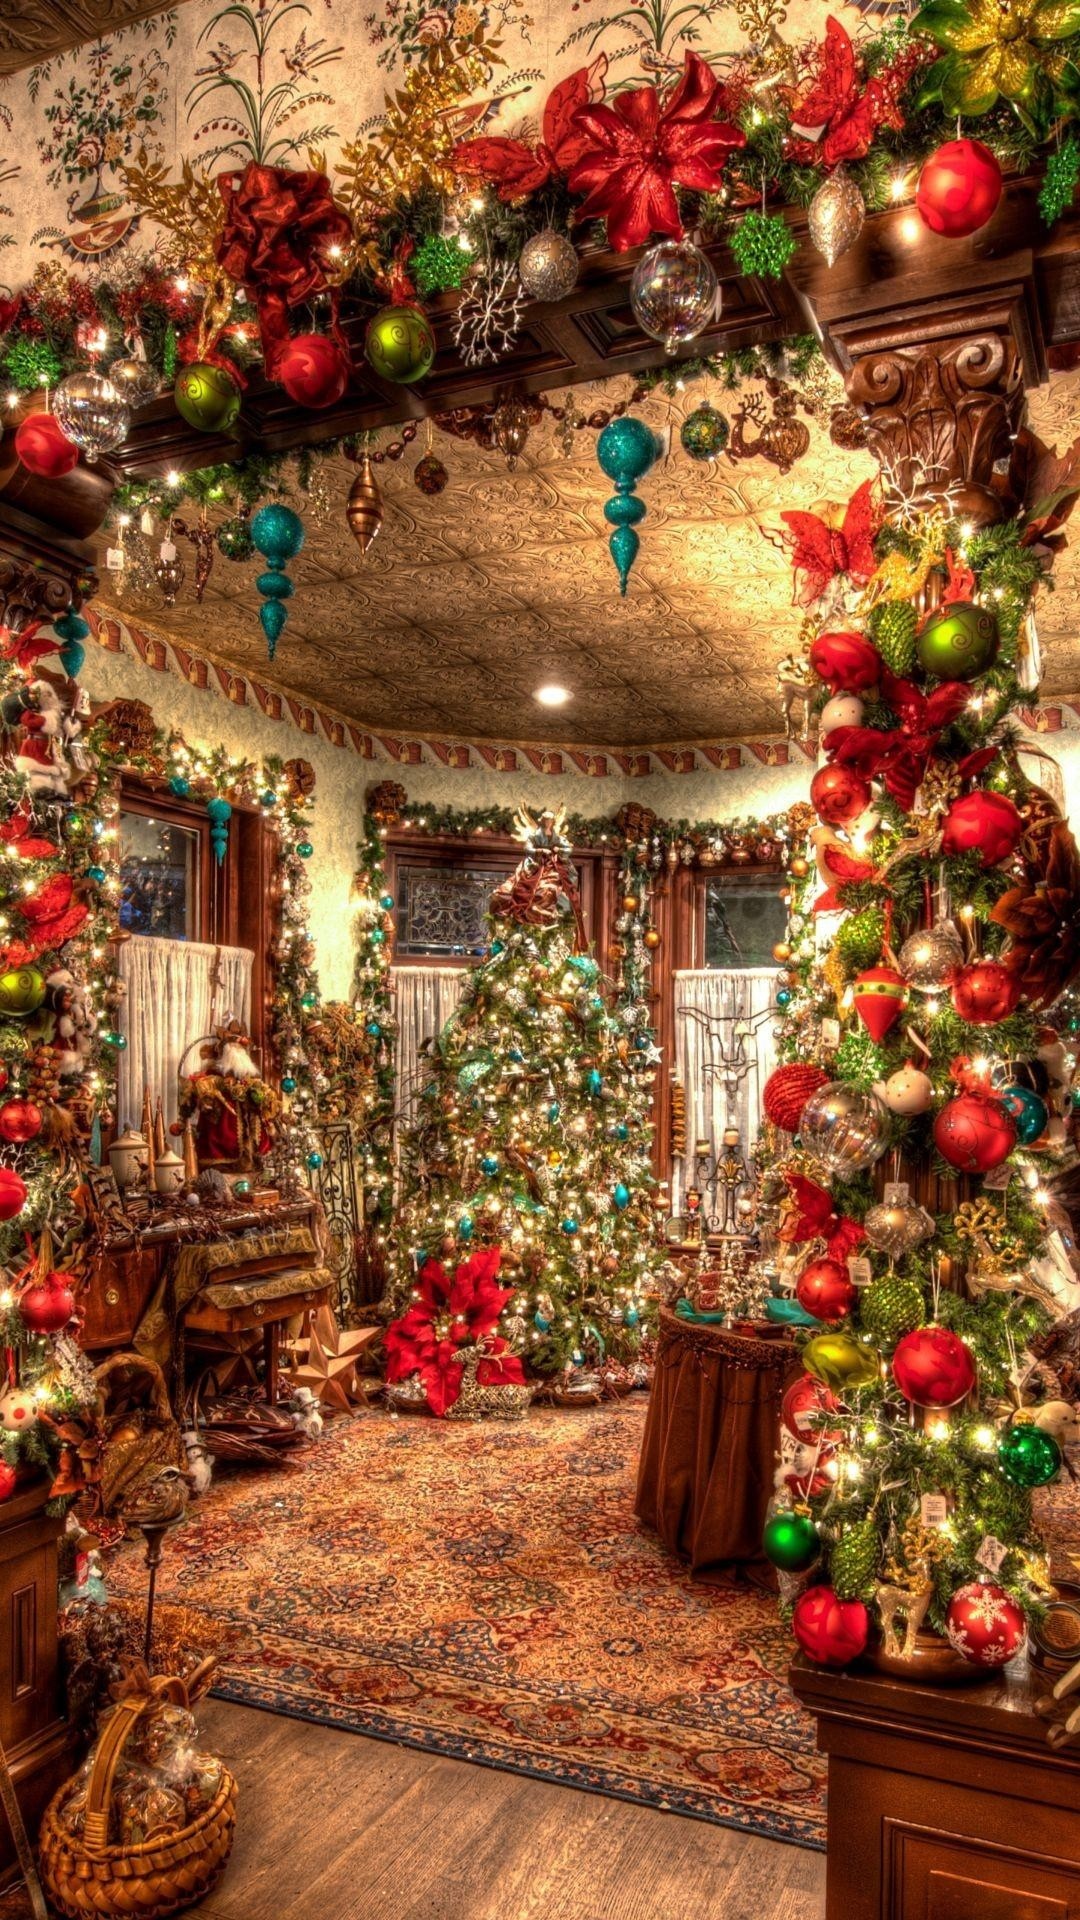 1080x1920 Christmas Decorations Big Room Tree Android Wallpaper